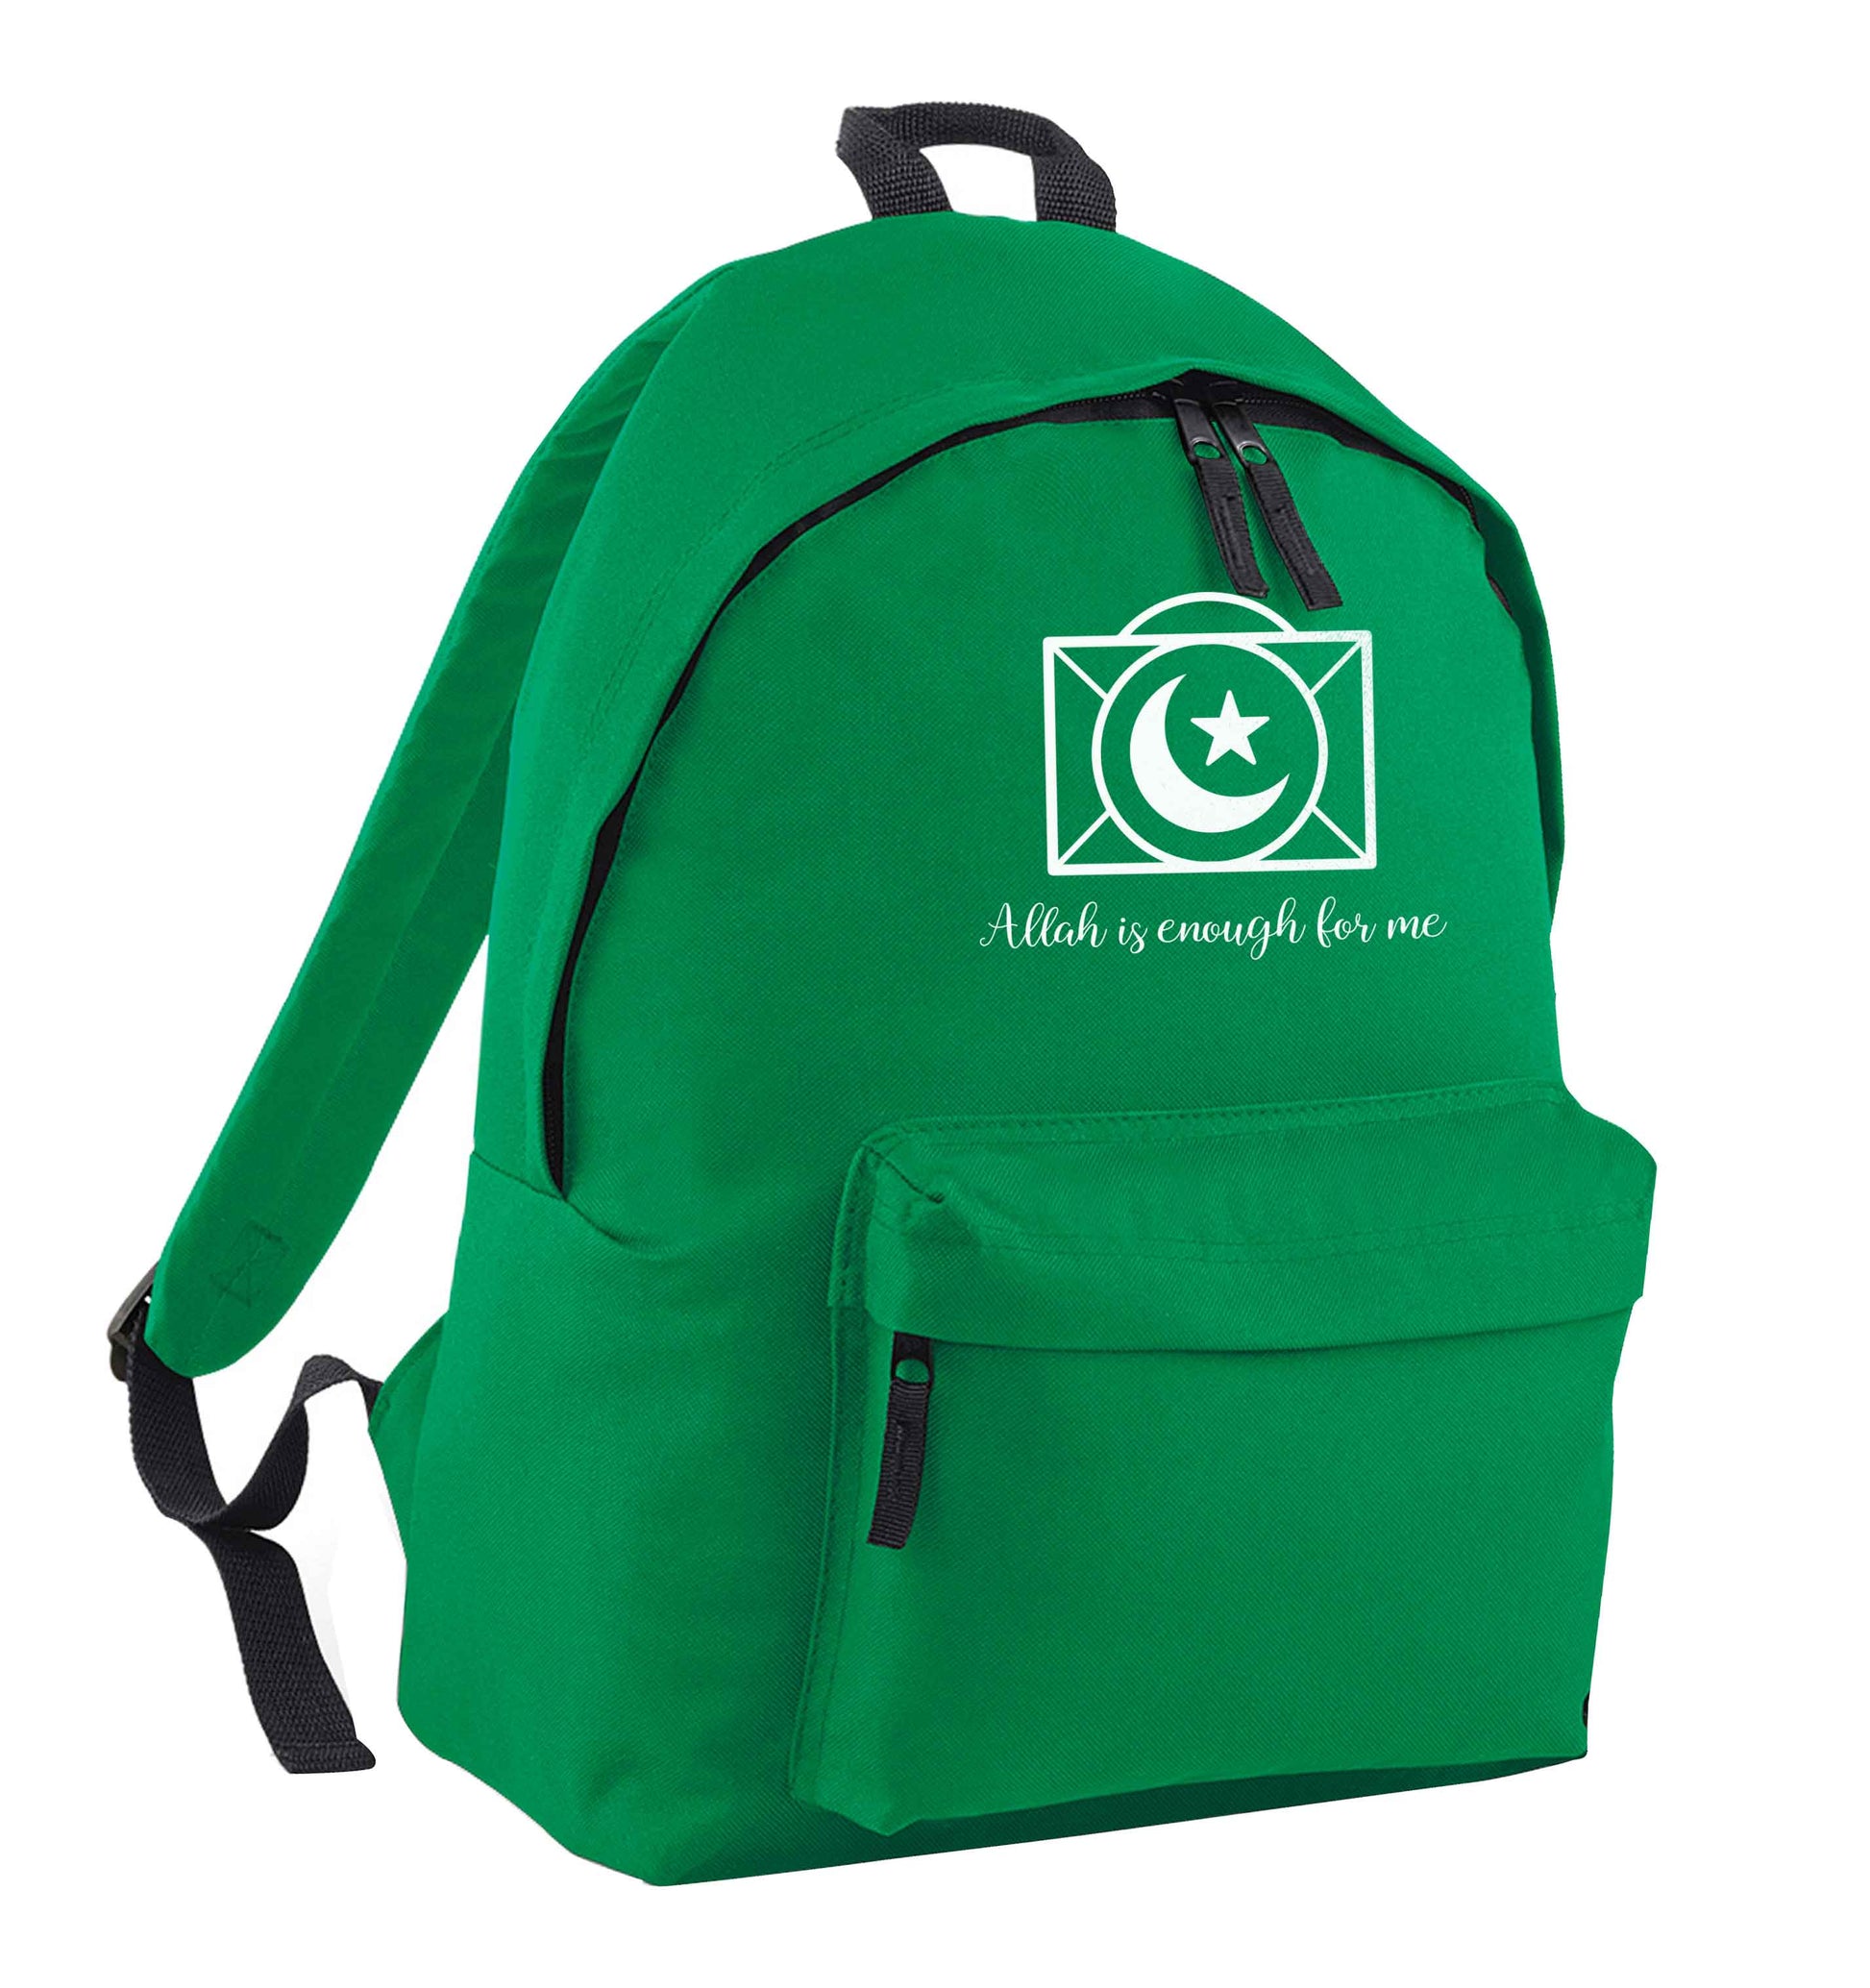 Allah is enough for me green adults backpack